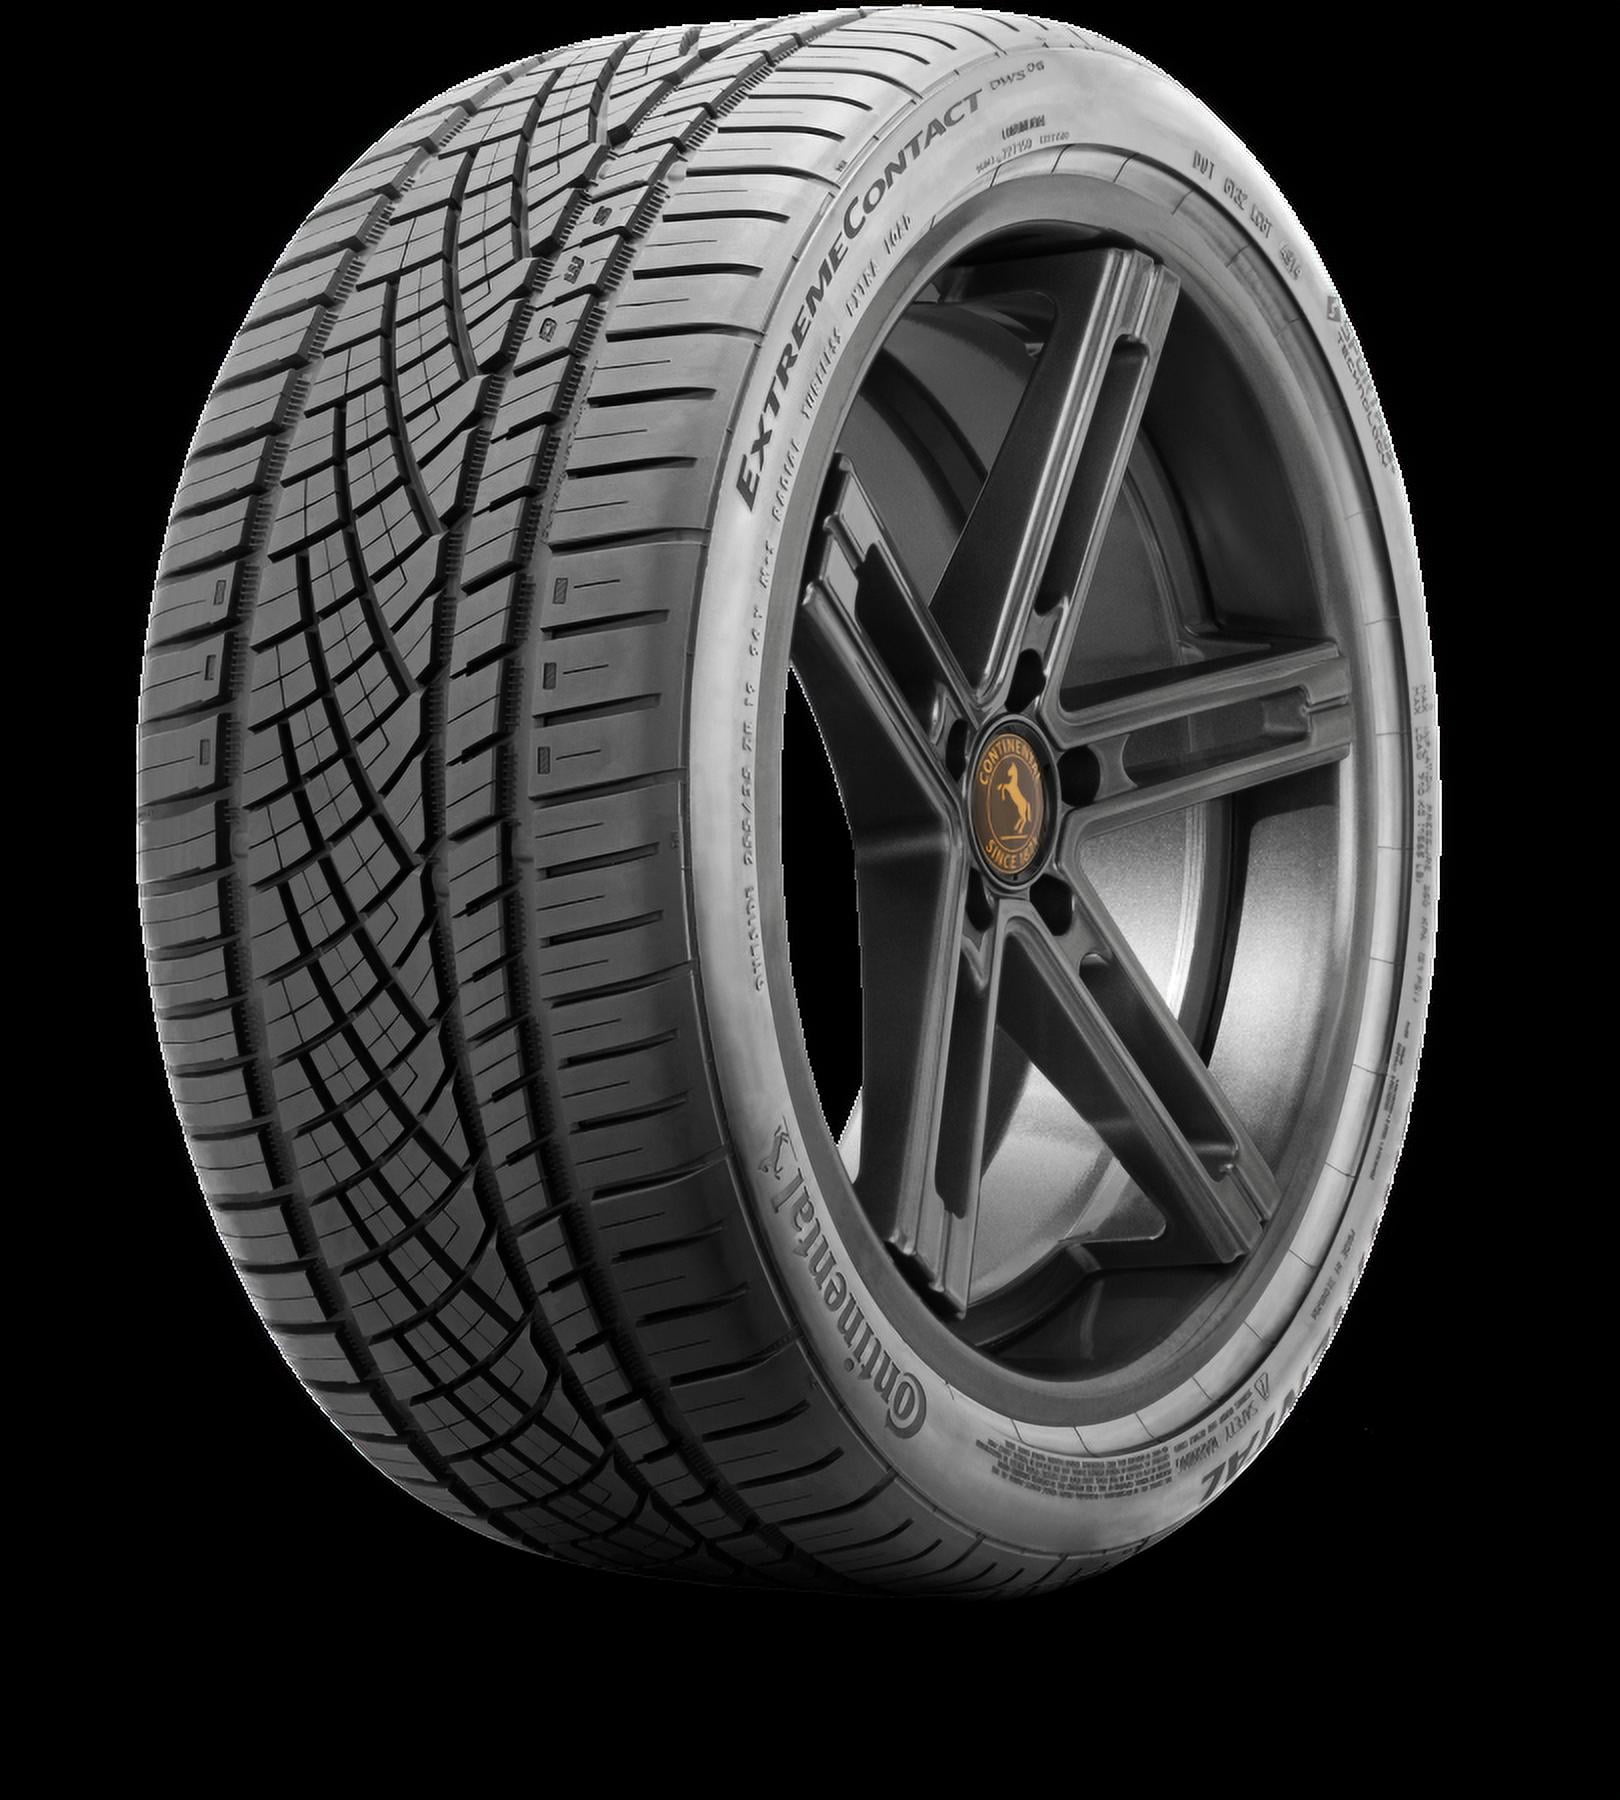 Continental Extreme Contact DWS06 245/50R19 105 Y Tire